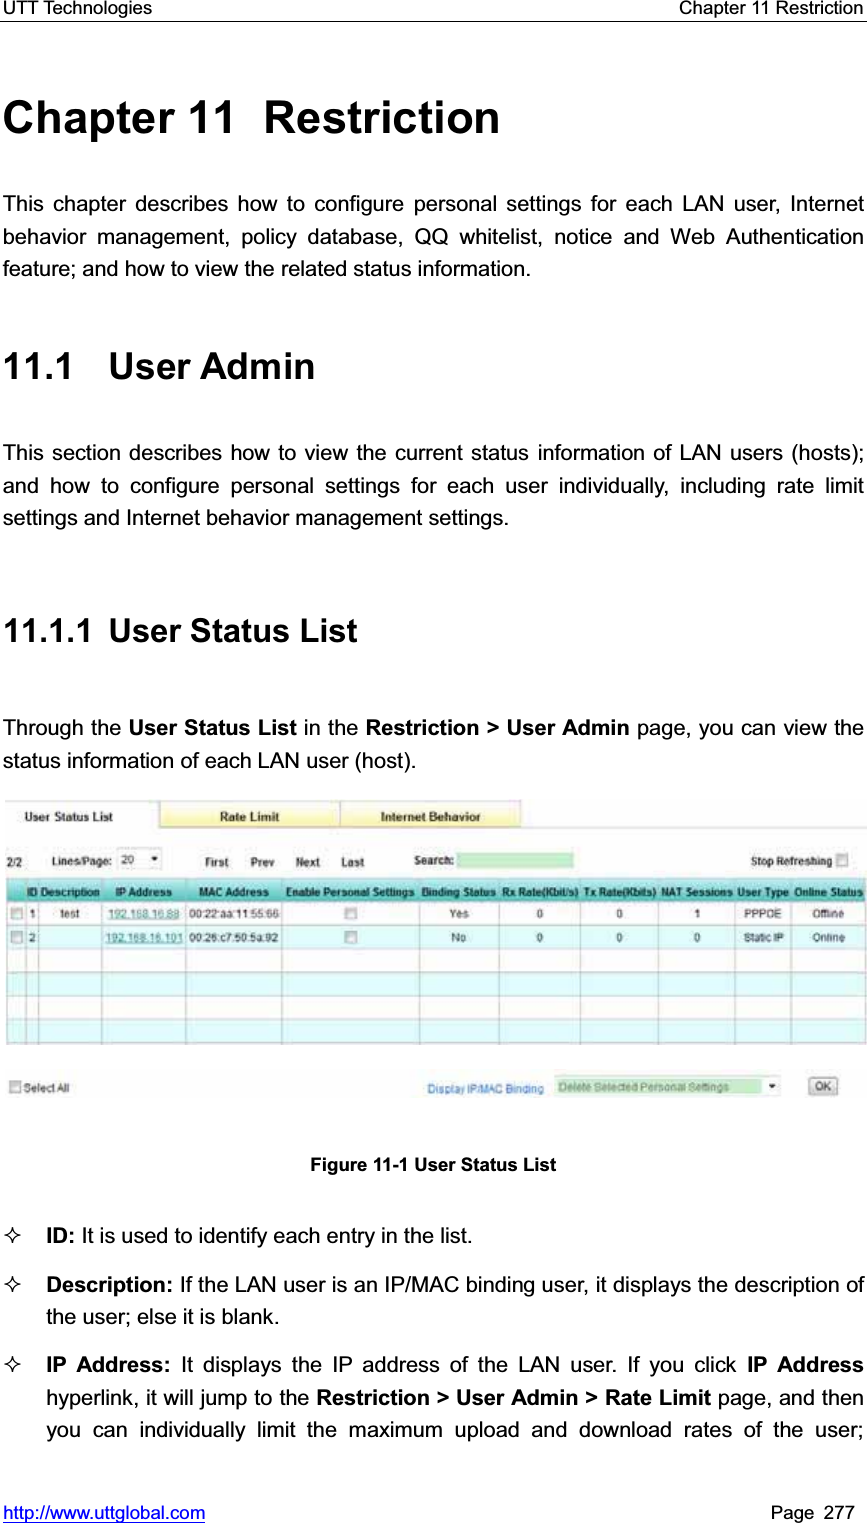 UTT Technologies    Chapter 11 Restriction   http://www.uttglobal.com Page 277 Chapter 11  Restriction This chapter describes how to configure personal settings for each LAN user, Internet behavior management, policy database, QQ whitelist, notice and Web Authentication feature; and how to view the related status information. 11.1 User Admin This section describes how to view the current status information of LAN users (hosts); and how to configure personal settings for each user individually, including rate limit settings and Internet behavior management settings.   11.1.1 User Status List Through the User Status List in the Restriction &gt; User Admin page, you can view the status information of each LAN user (host). Figure 11-1 User Status List ID: It is used to identify each entry in the list.Description: If the LAN user is an IP/MAC binding user, it displays the description of the user; else it is blank.IP Address: It displays the IP address of the LAN user. If you click IP Address hyperlink, it will jump to the Restriction &gt; User Admin &gt; Rate Limit page, and then you can individually limit the maximum upload and download rates of the user; 